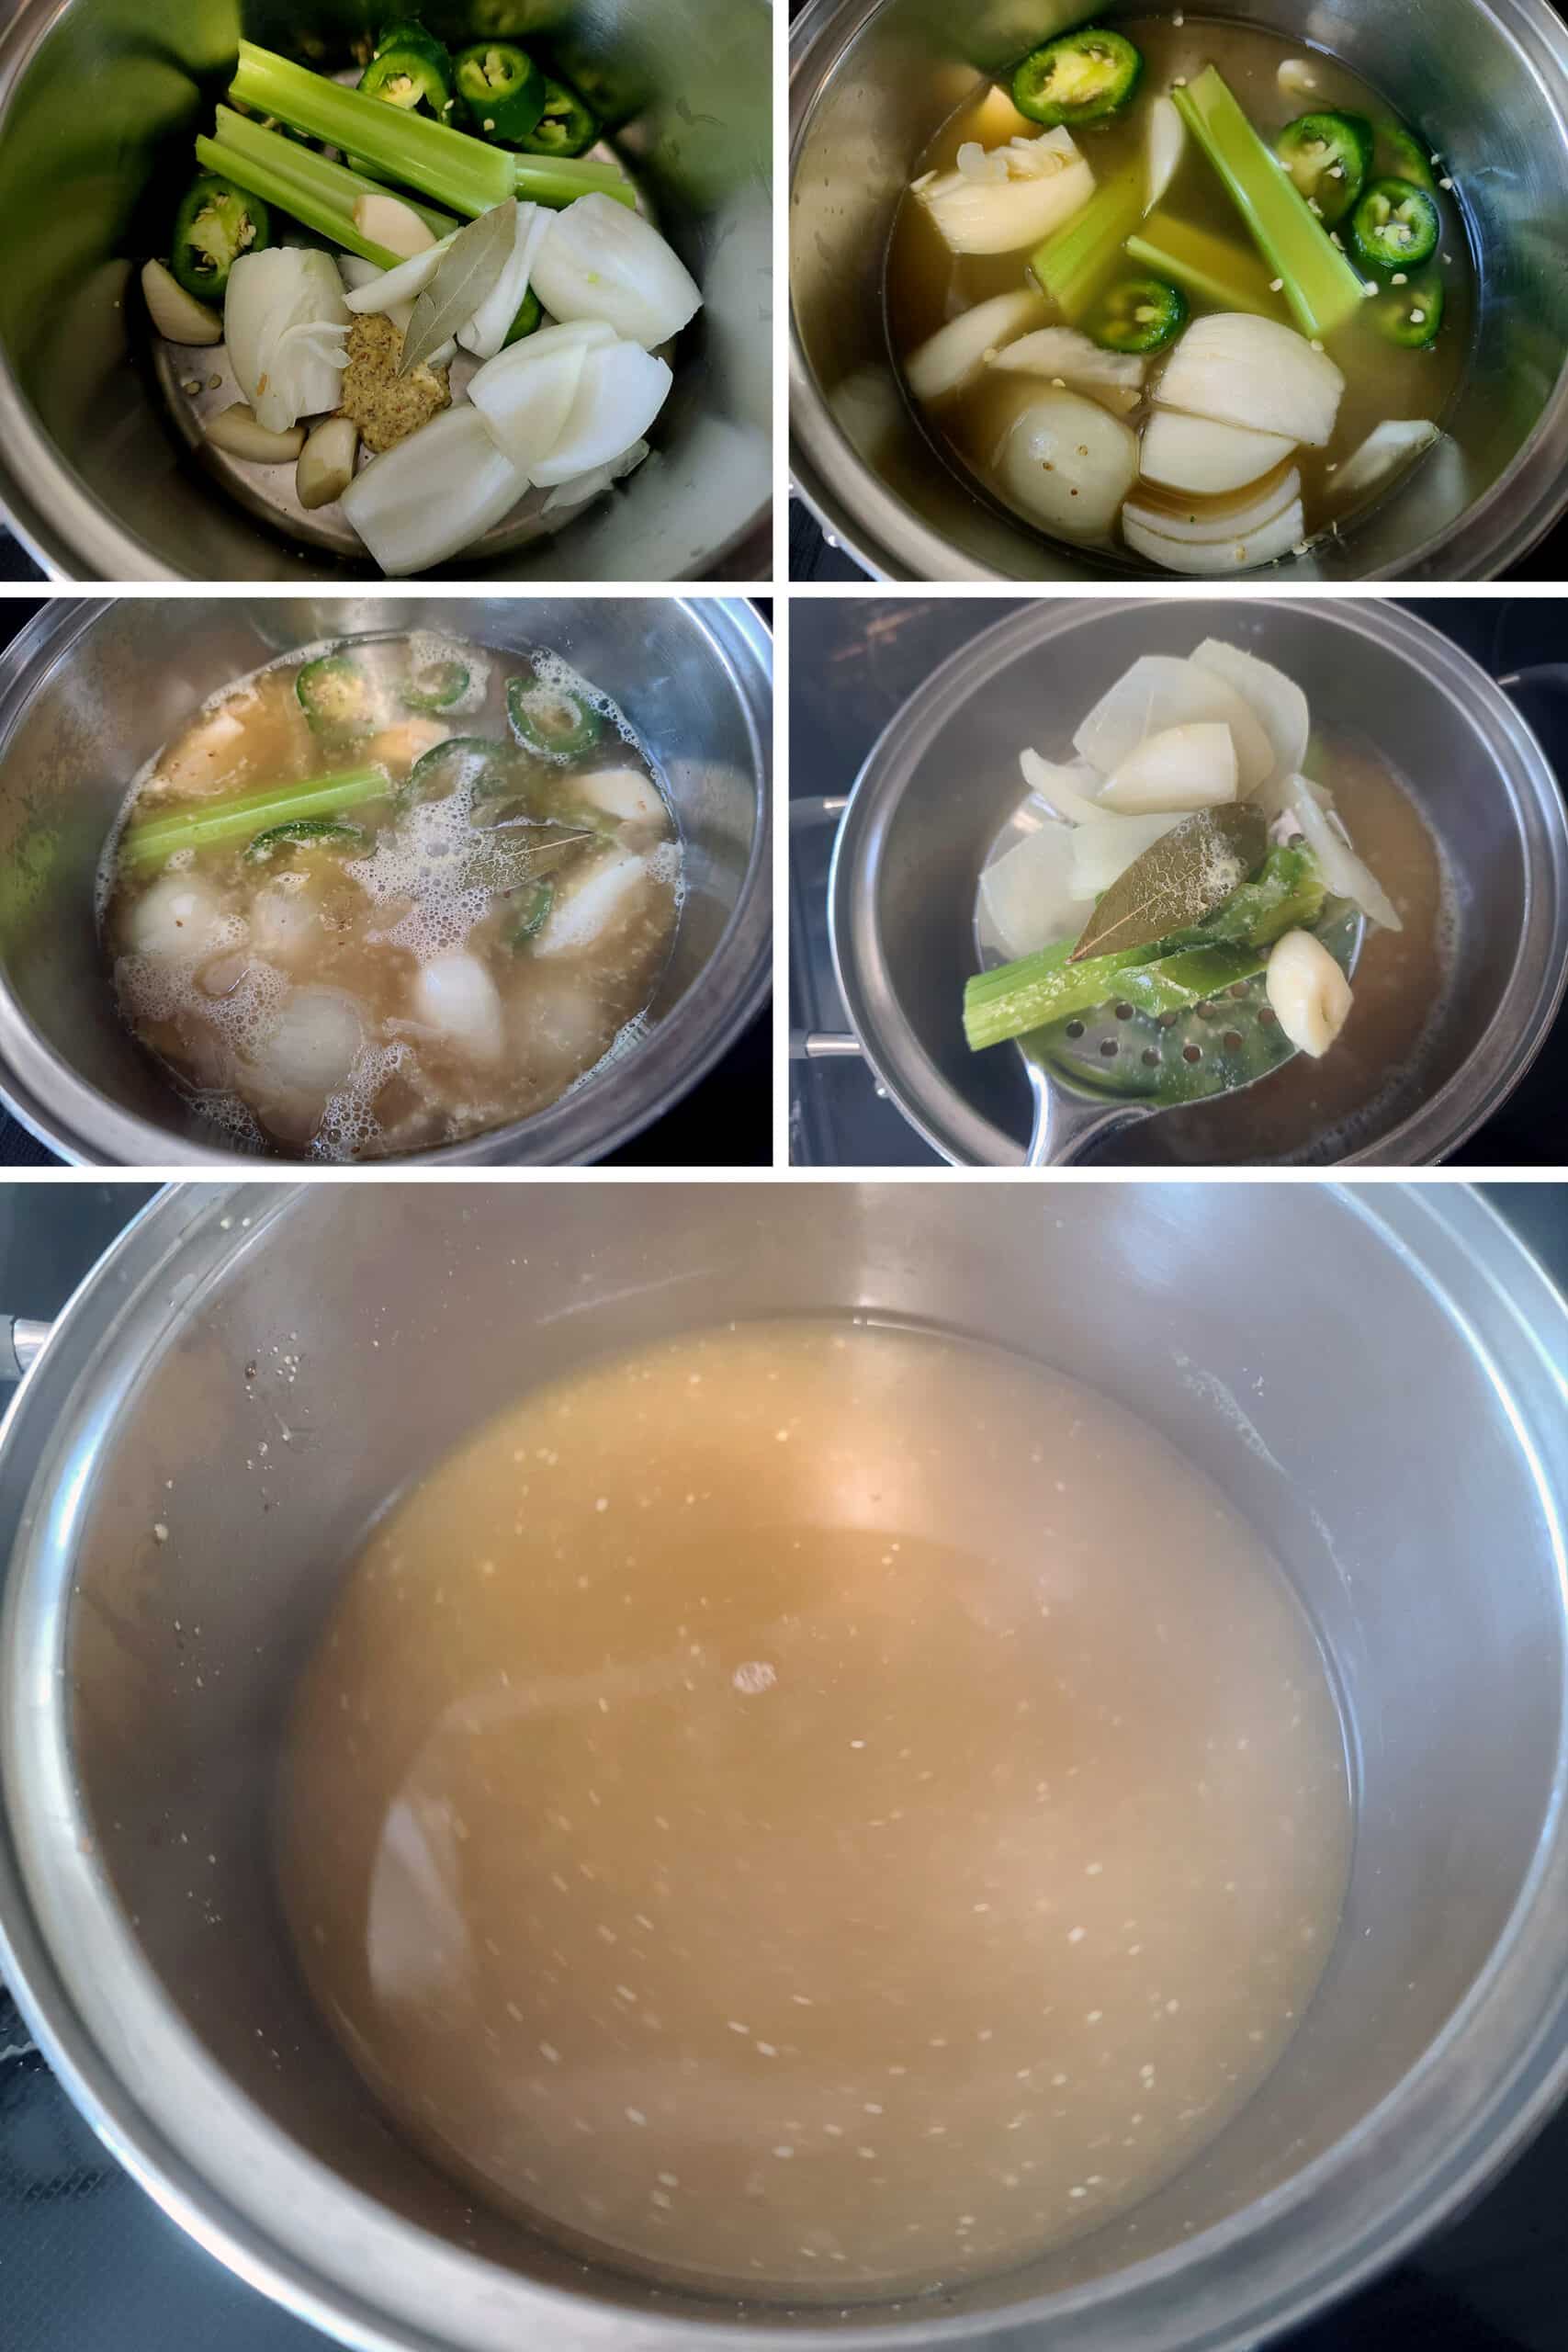 A 5 part image showing the chicken broth being boiled with the flavouring ingredients, then after being strained.